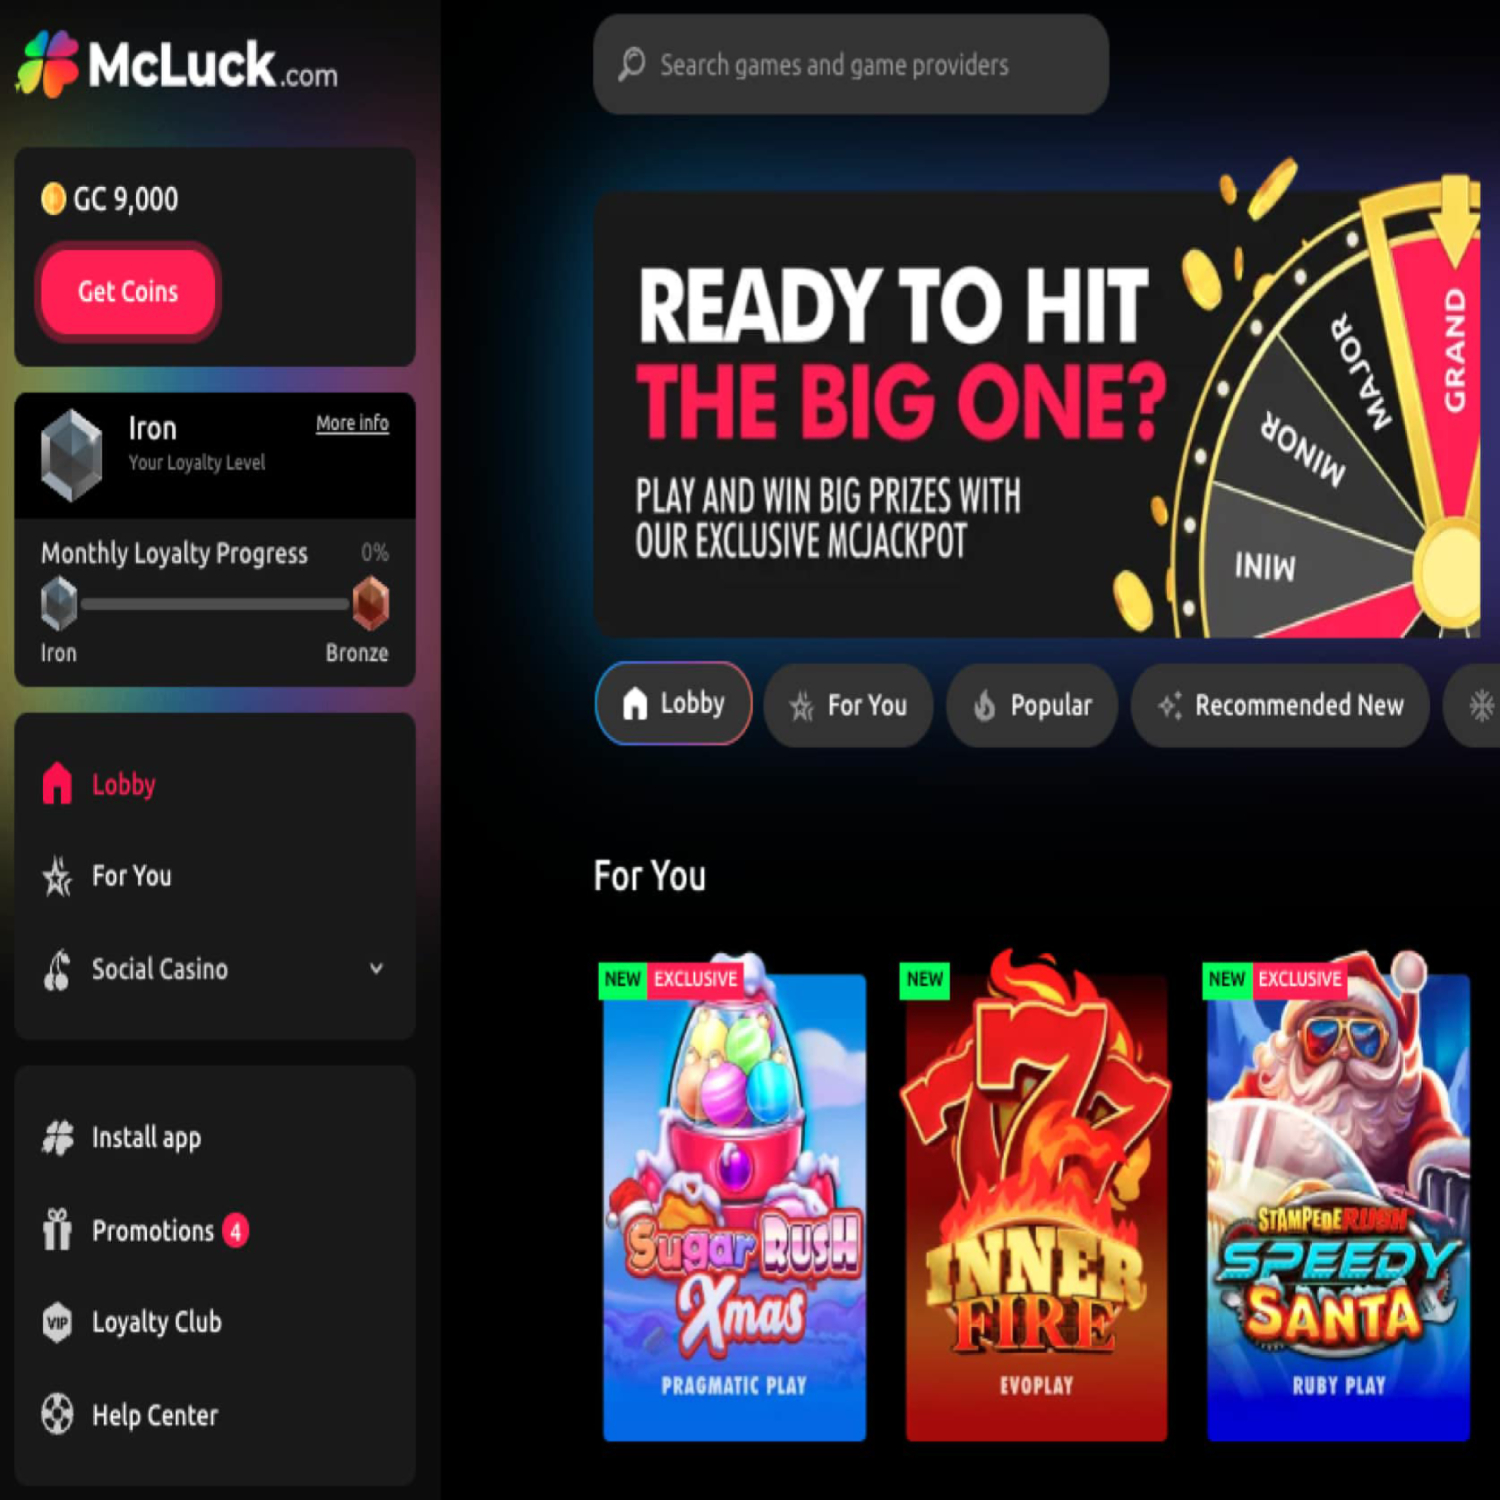 McLuck Casino - Context in Review